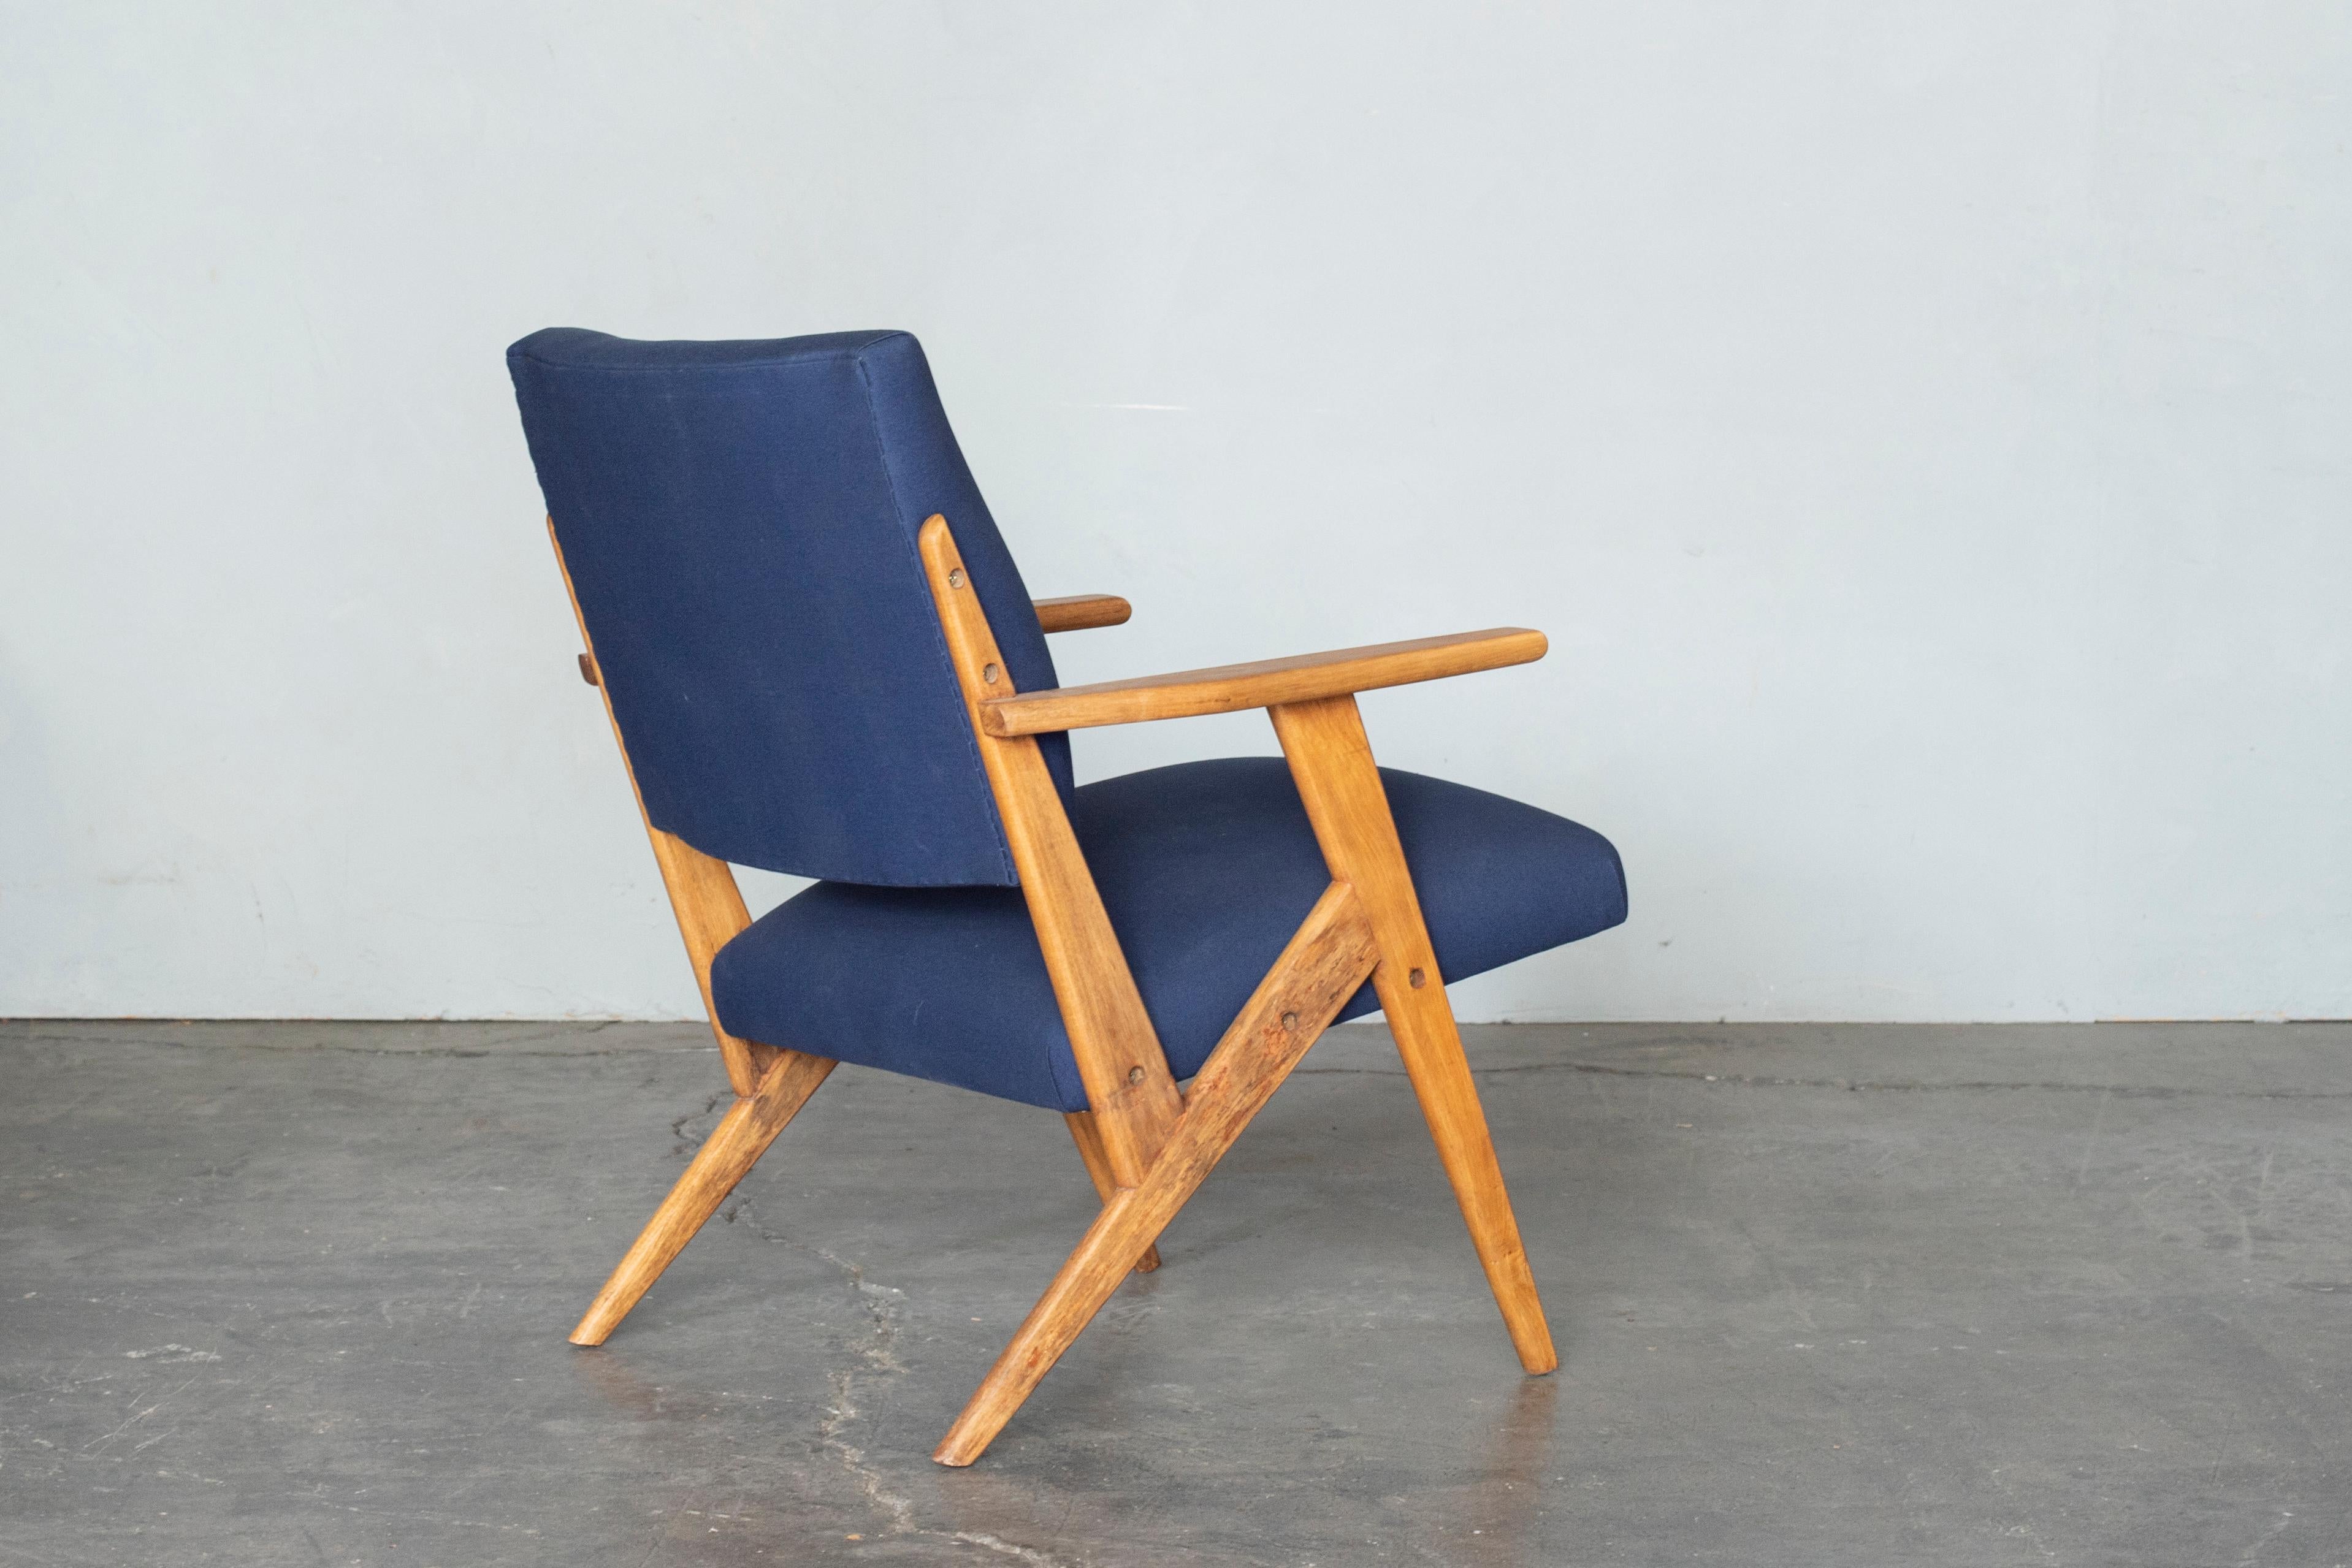 A set of armchairs designed by Jose Zanine Caldas for his studio 'Moveis Artisticos Z' in 1950.
Brazilian midcentury design.
Made with solid wood, reupholstered with blue fabric.
          